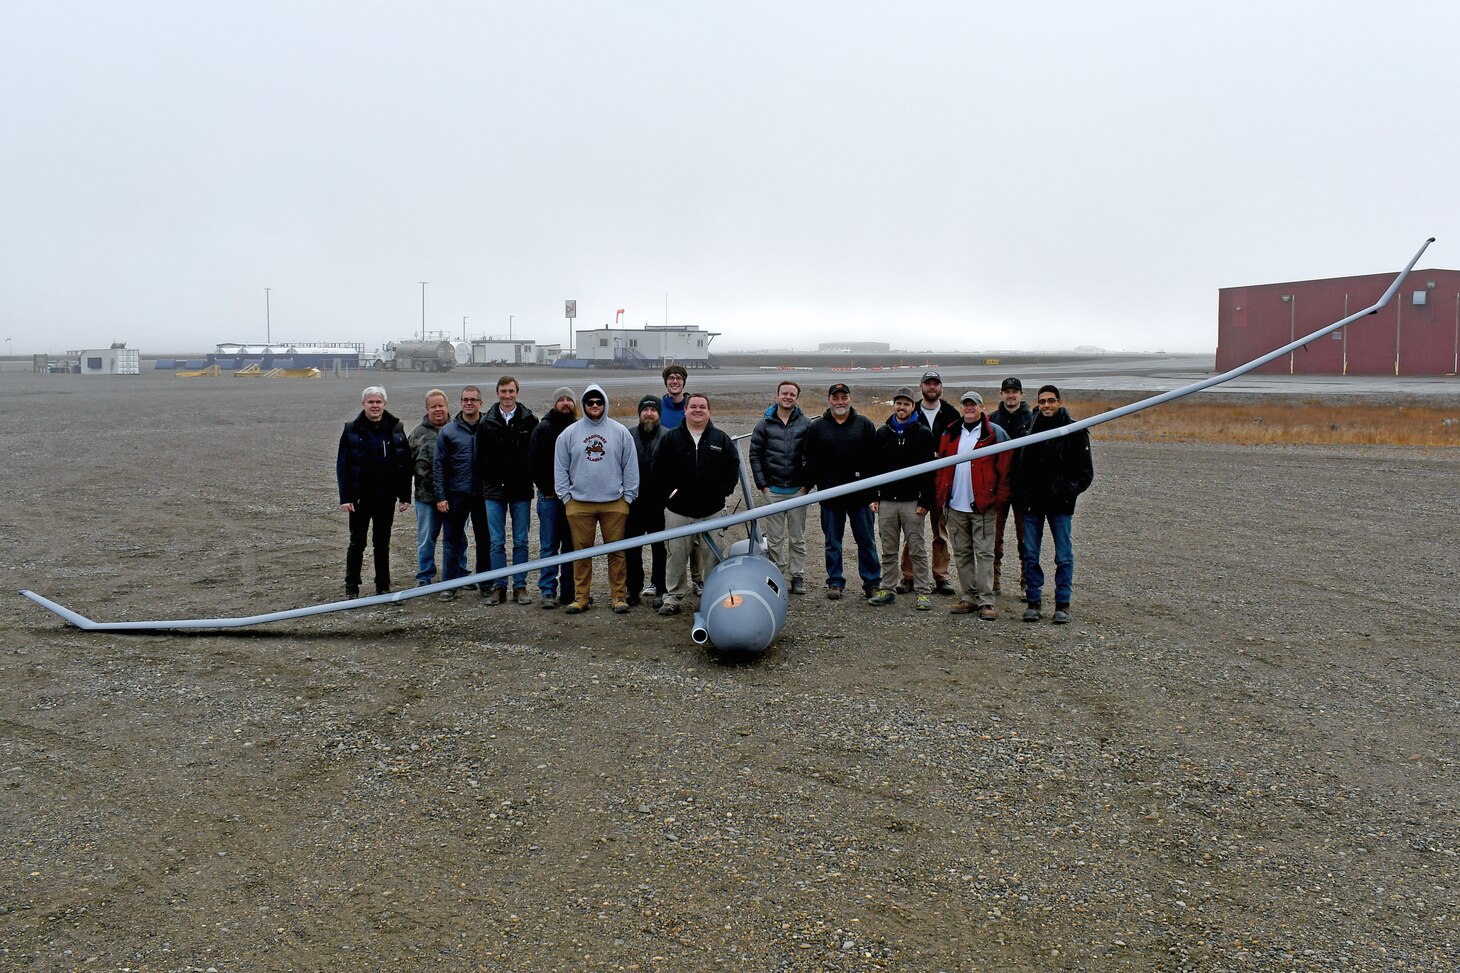 A team of researchers from Platform Aerospace, the Naval Postgraduate School (NPS) and the Naval Research Laboratory (NRL) recently used a Platform “Vanilla” unmanned aerial vehicle (UAV) to conduct testing of flight-path planning software developed at NPS. The flight tests above the Arctic Circle employed NPS’ “POTION” software, which is intended to optimize the operational efficiency and endurance of manned and unmanned aircraft.